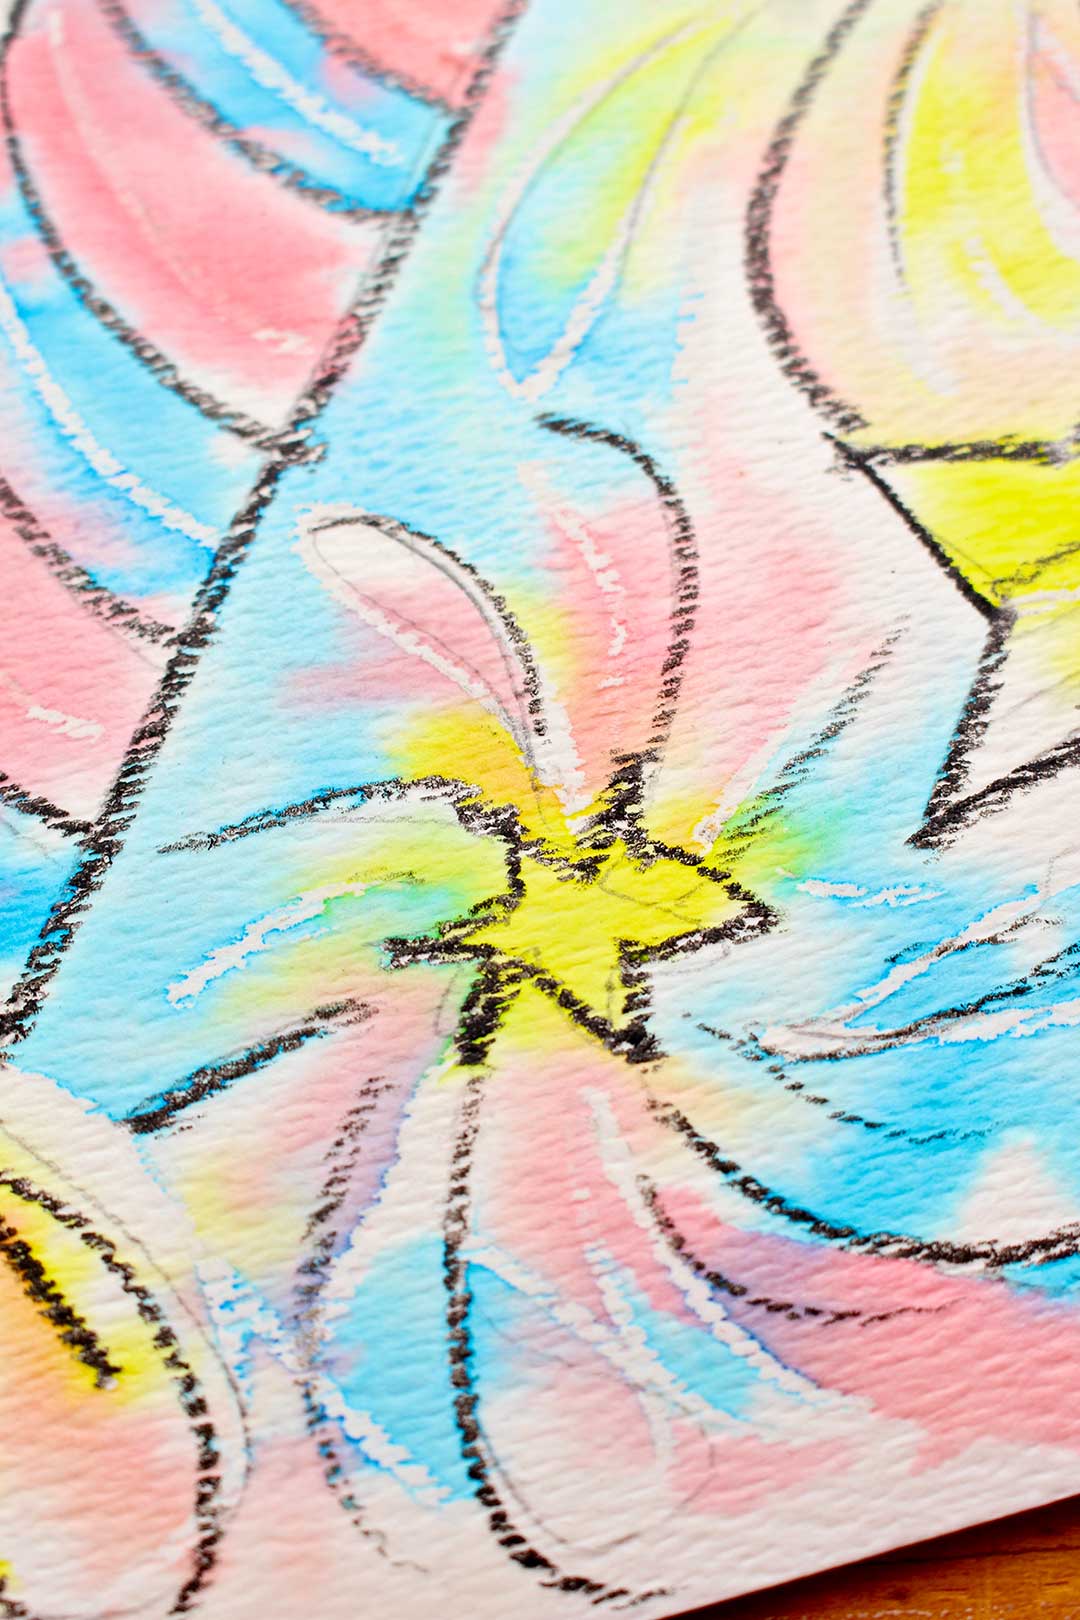 Full frame close up of a star on the watercolor resist with crayon painting.